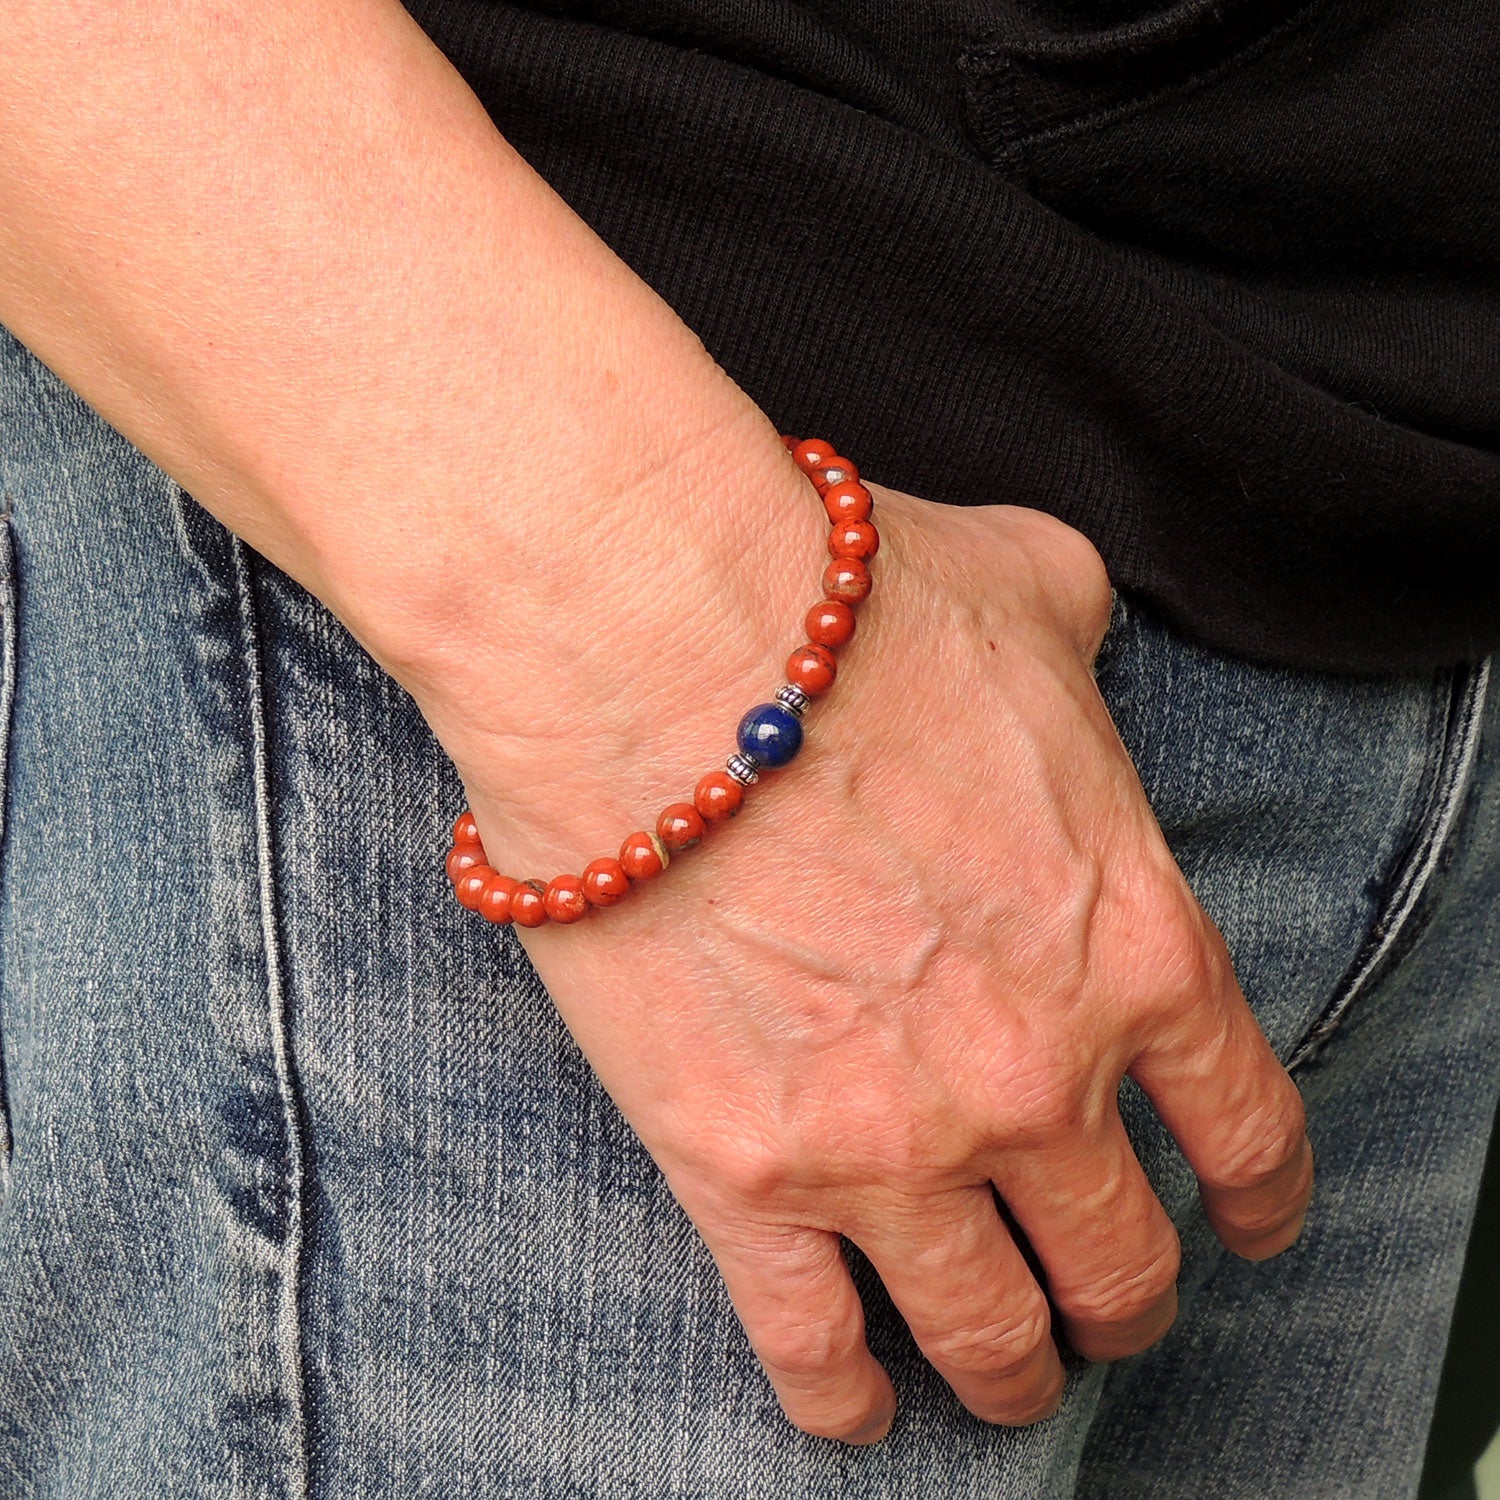 Handmade Yoga Jewelry Adjustable Braided Bracelet - Men's Women's Compassion, Protection with Natural Healing Gemstones Red Jasper, Lapis Lazuli, Genuine Non-Plated Sterling Silver BR1834